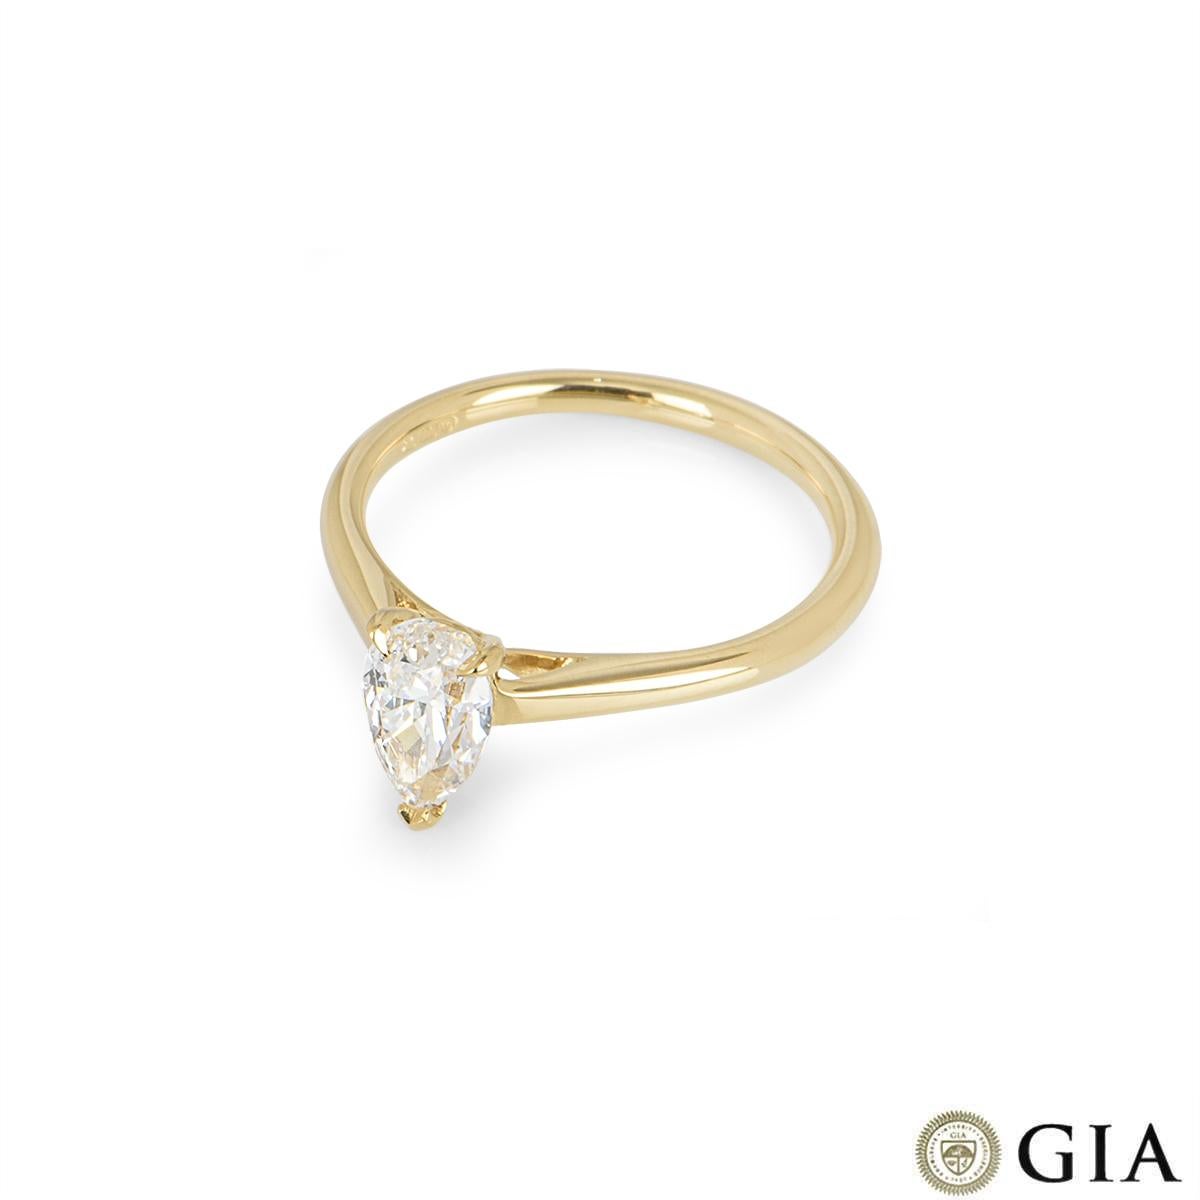 GIA Certified Yellow Gold Pear Cut Diamond Ring 0.90ct F/VVS1 In Excellent Condition For Sale In London, GB